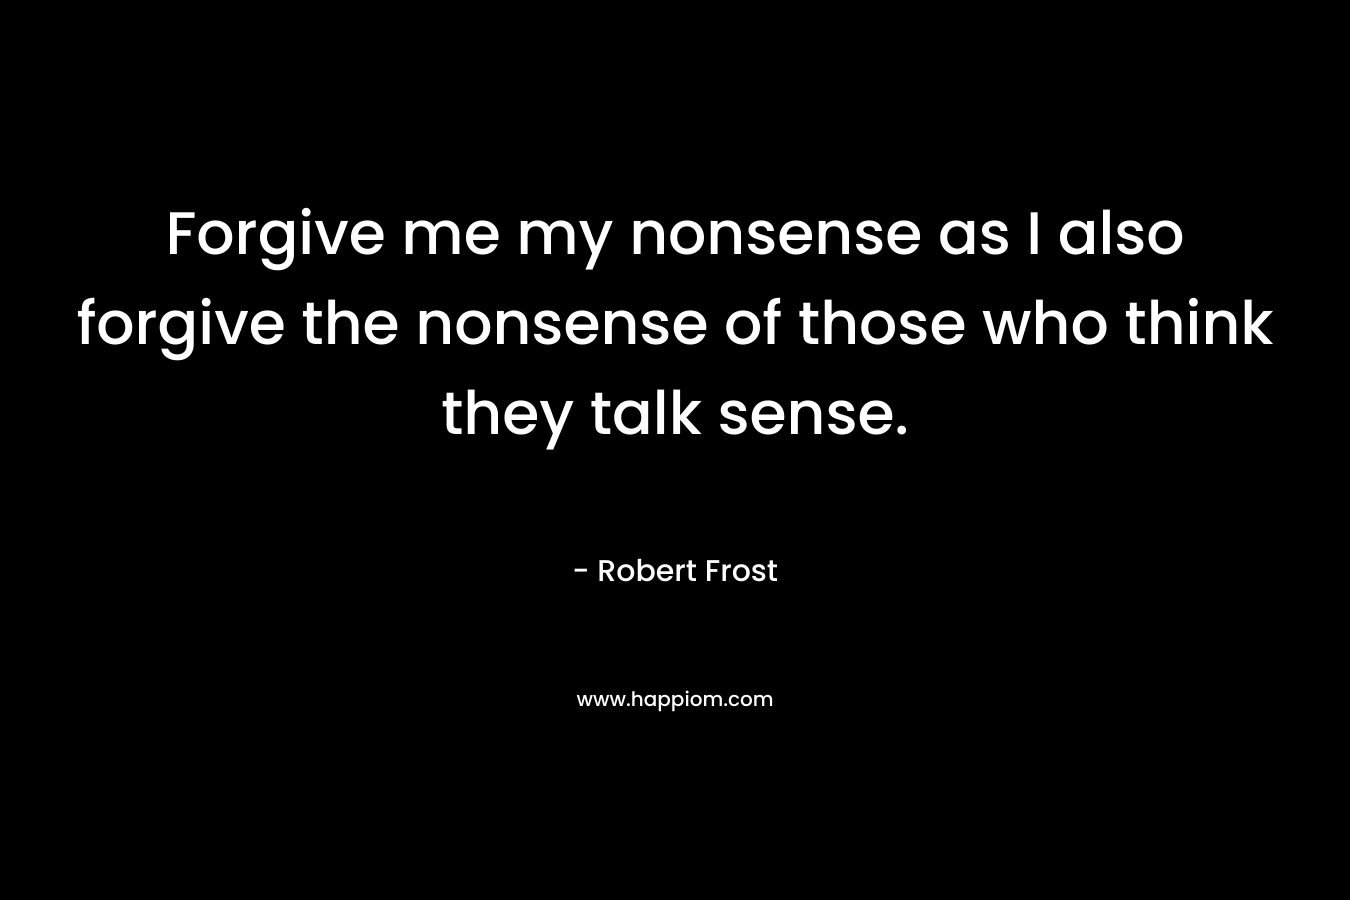 Forgive me my nonsense as I also forgive the nonsense of those who think they talk sense. – Robert Frost